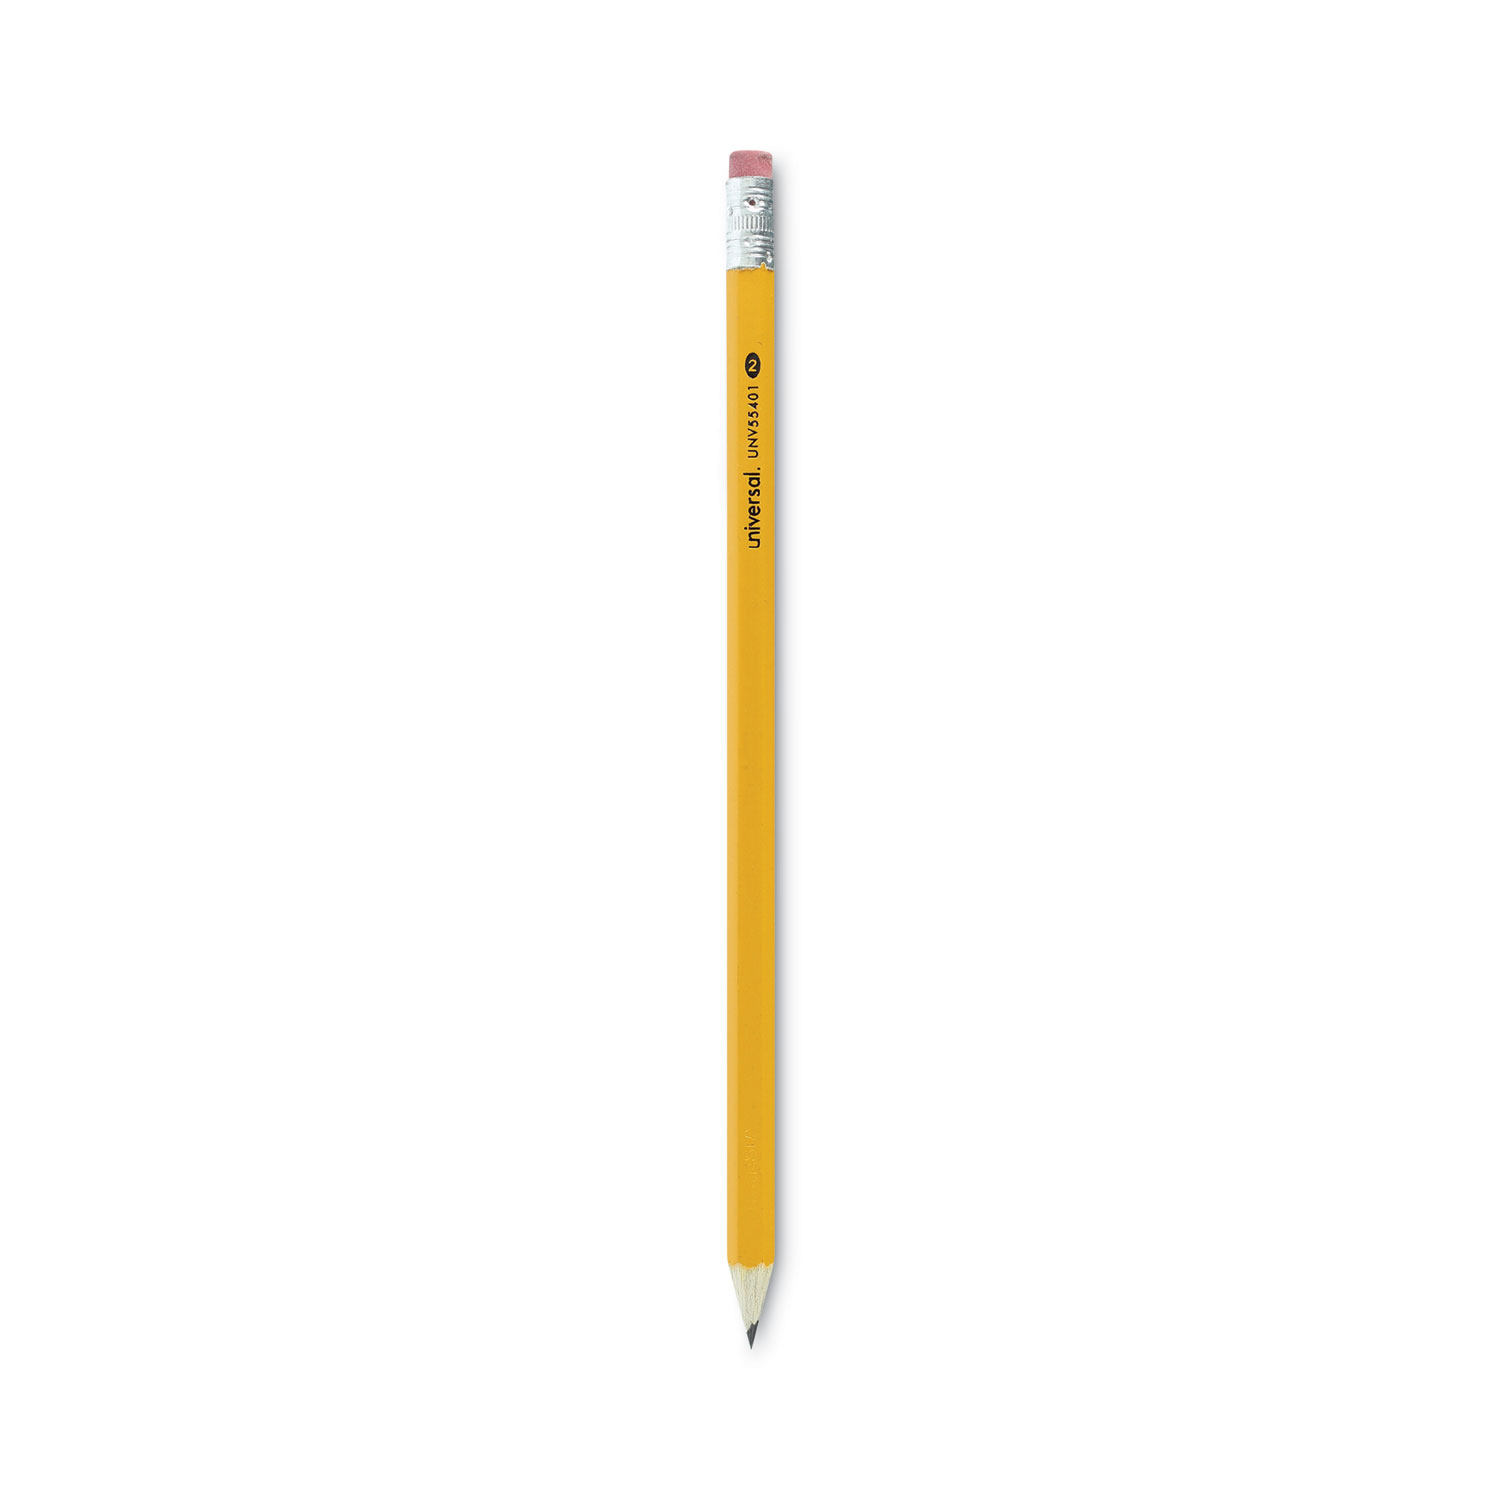   Basics Woodcased #2 Pencils, Pre-sharpened, HB Lead, 30  count, Orange : Office Products